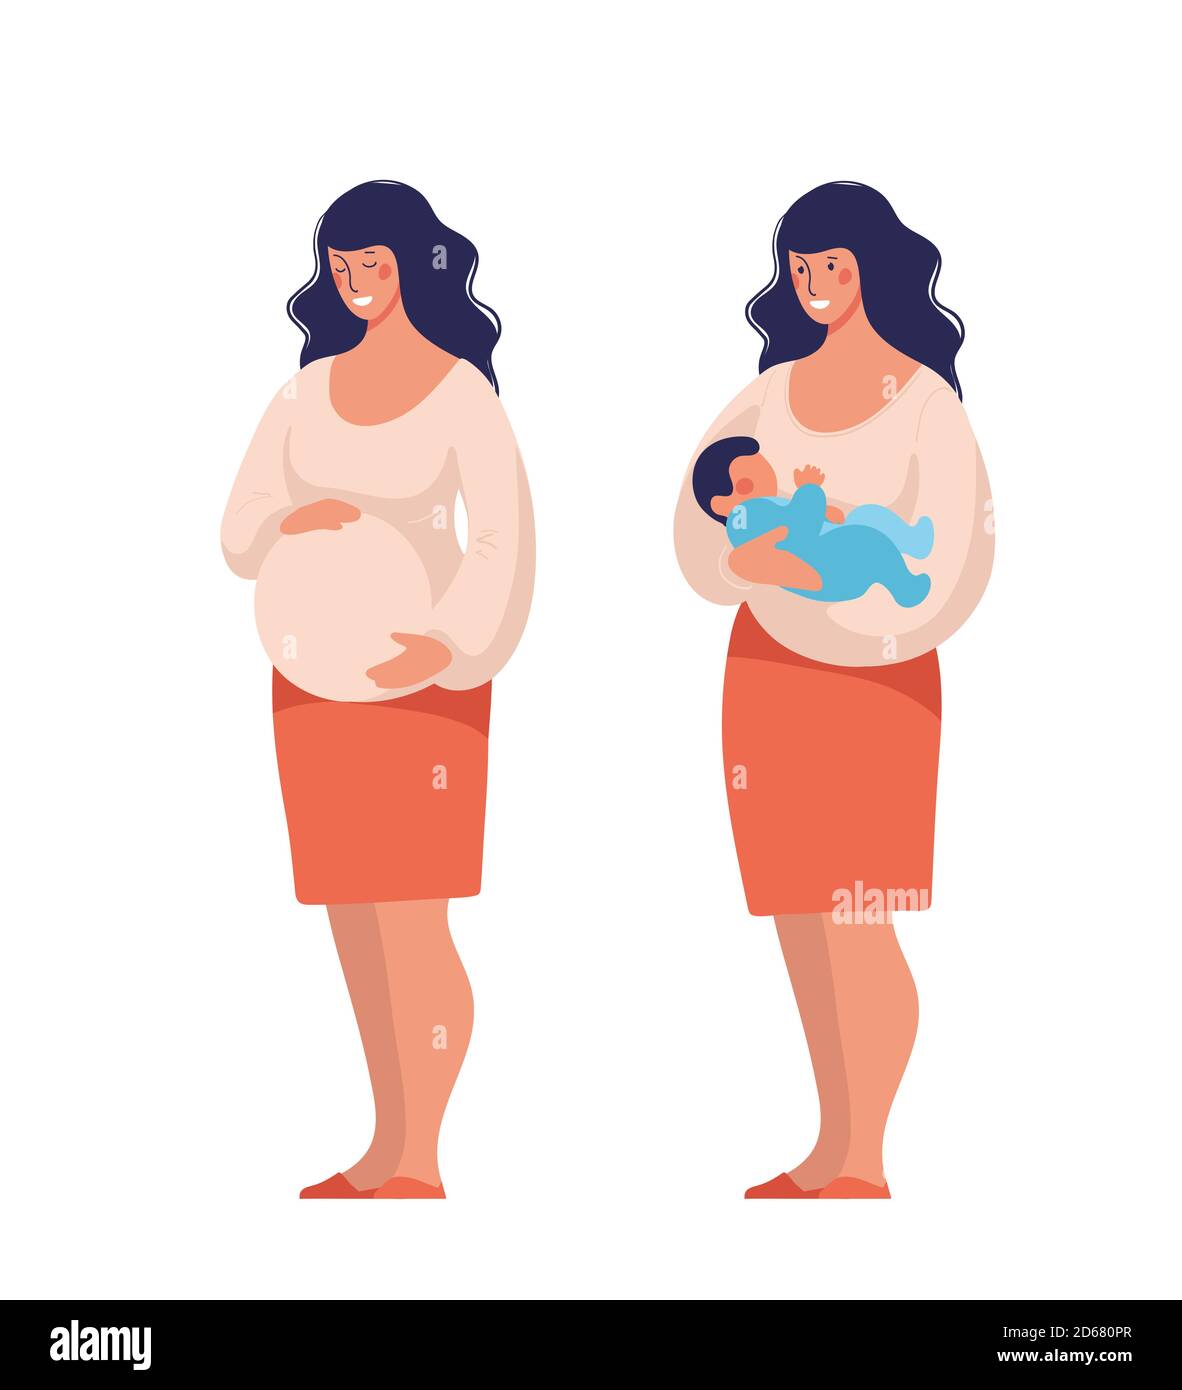 https://c8.alamy.com/comp/2D680PR/pregnant-woman-before-and-after-childbirth-cute-standing-character-for-maternity-and-pregnancy-design-cartoon-flat-vector-illustration-isolated-on-white-2D680PR.jpg